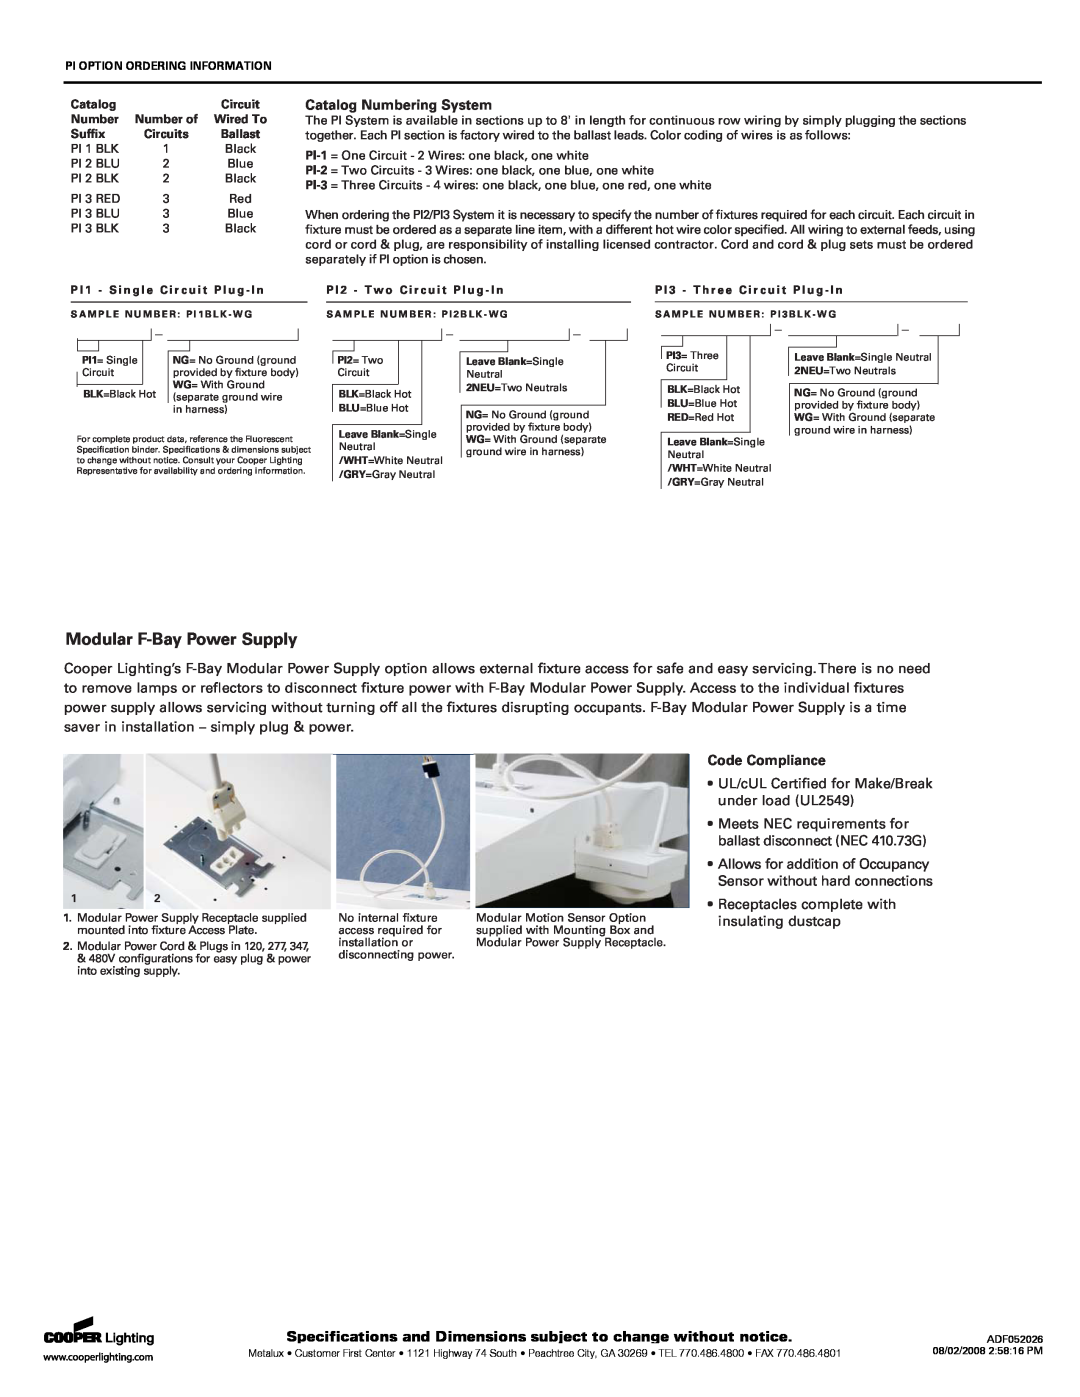 Cooper Lighting F-BAY I8 Catalog Numbering System, Code Compliance, Modular F-BayPower Supply, Wired To, Sufﬁx 